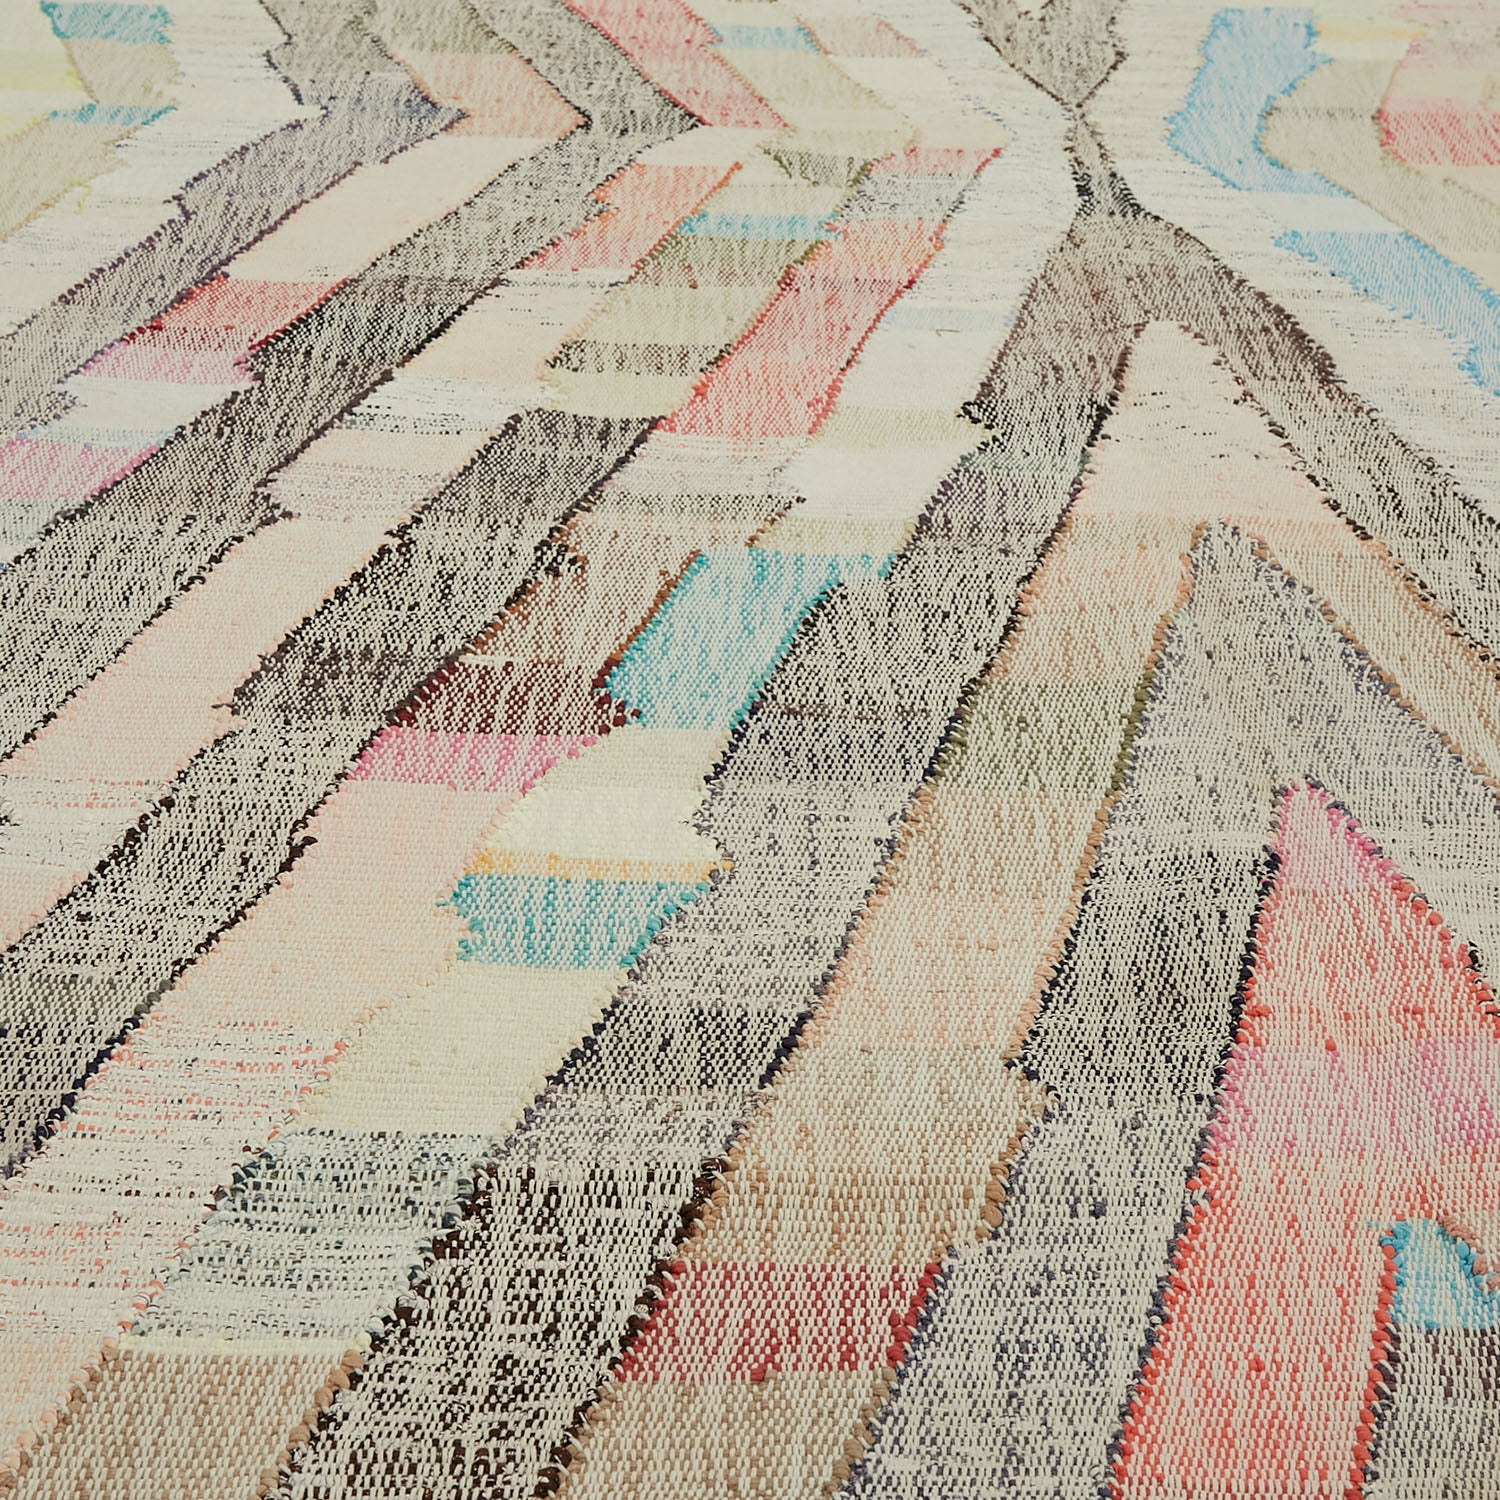 Close-up of intricately woven fabric with dynamic herringbone-like pattern.